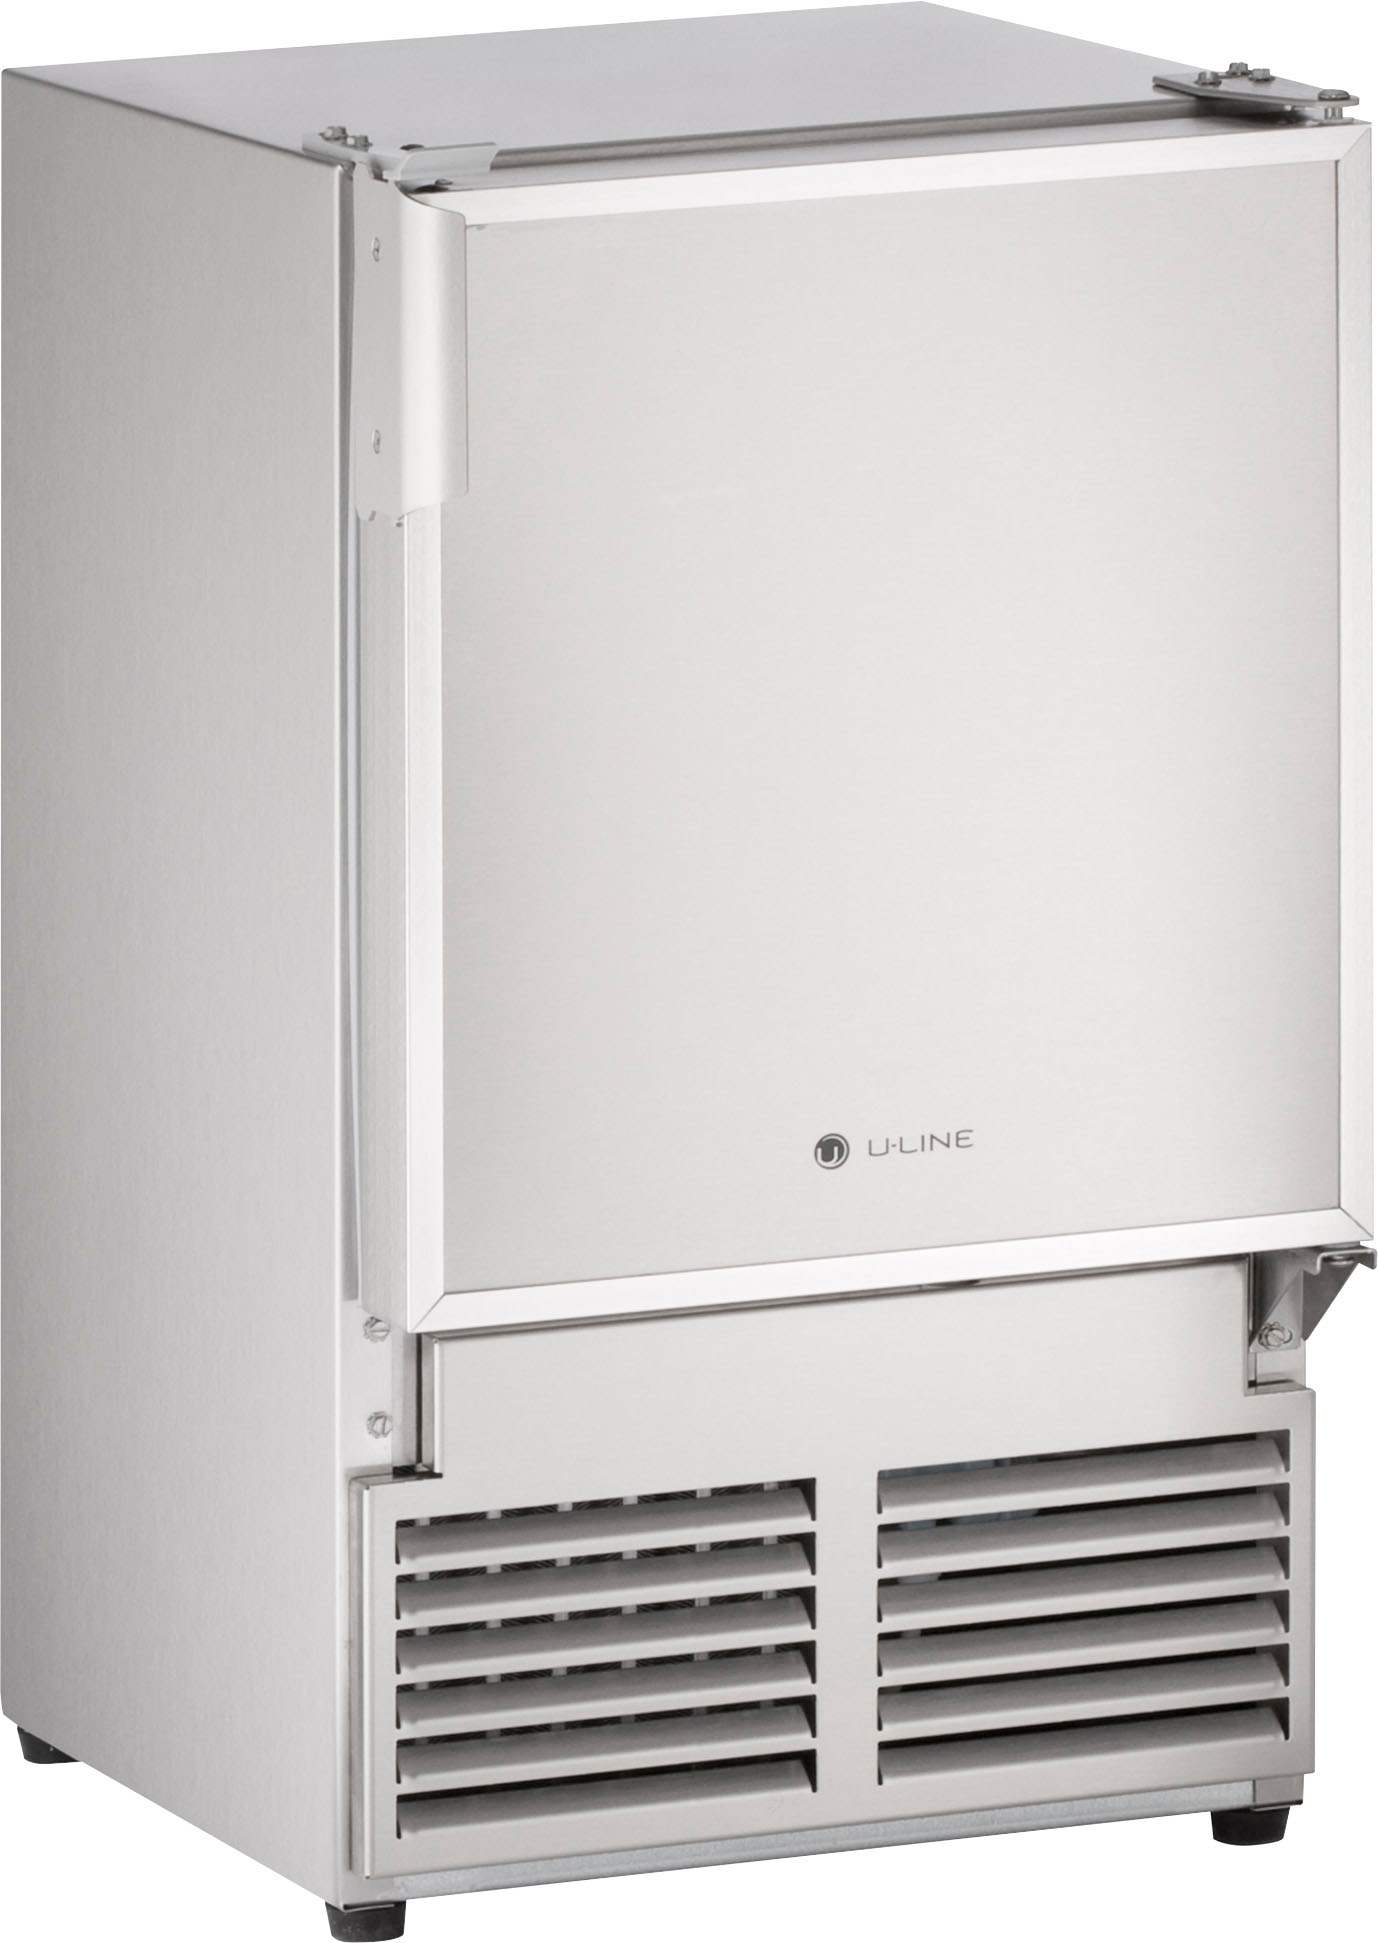 Angle View: U-Line - 14" 23-Lb. Freestanding Ice Maker - Stainless steel